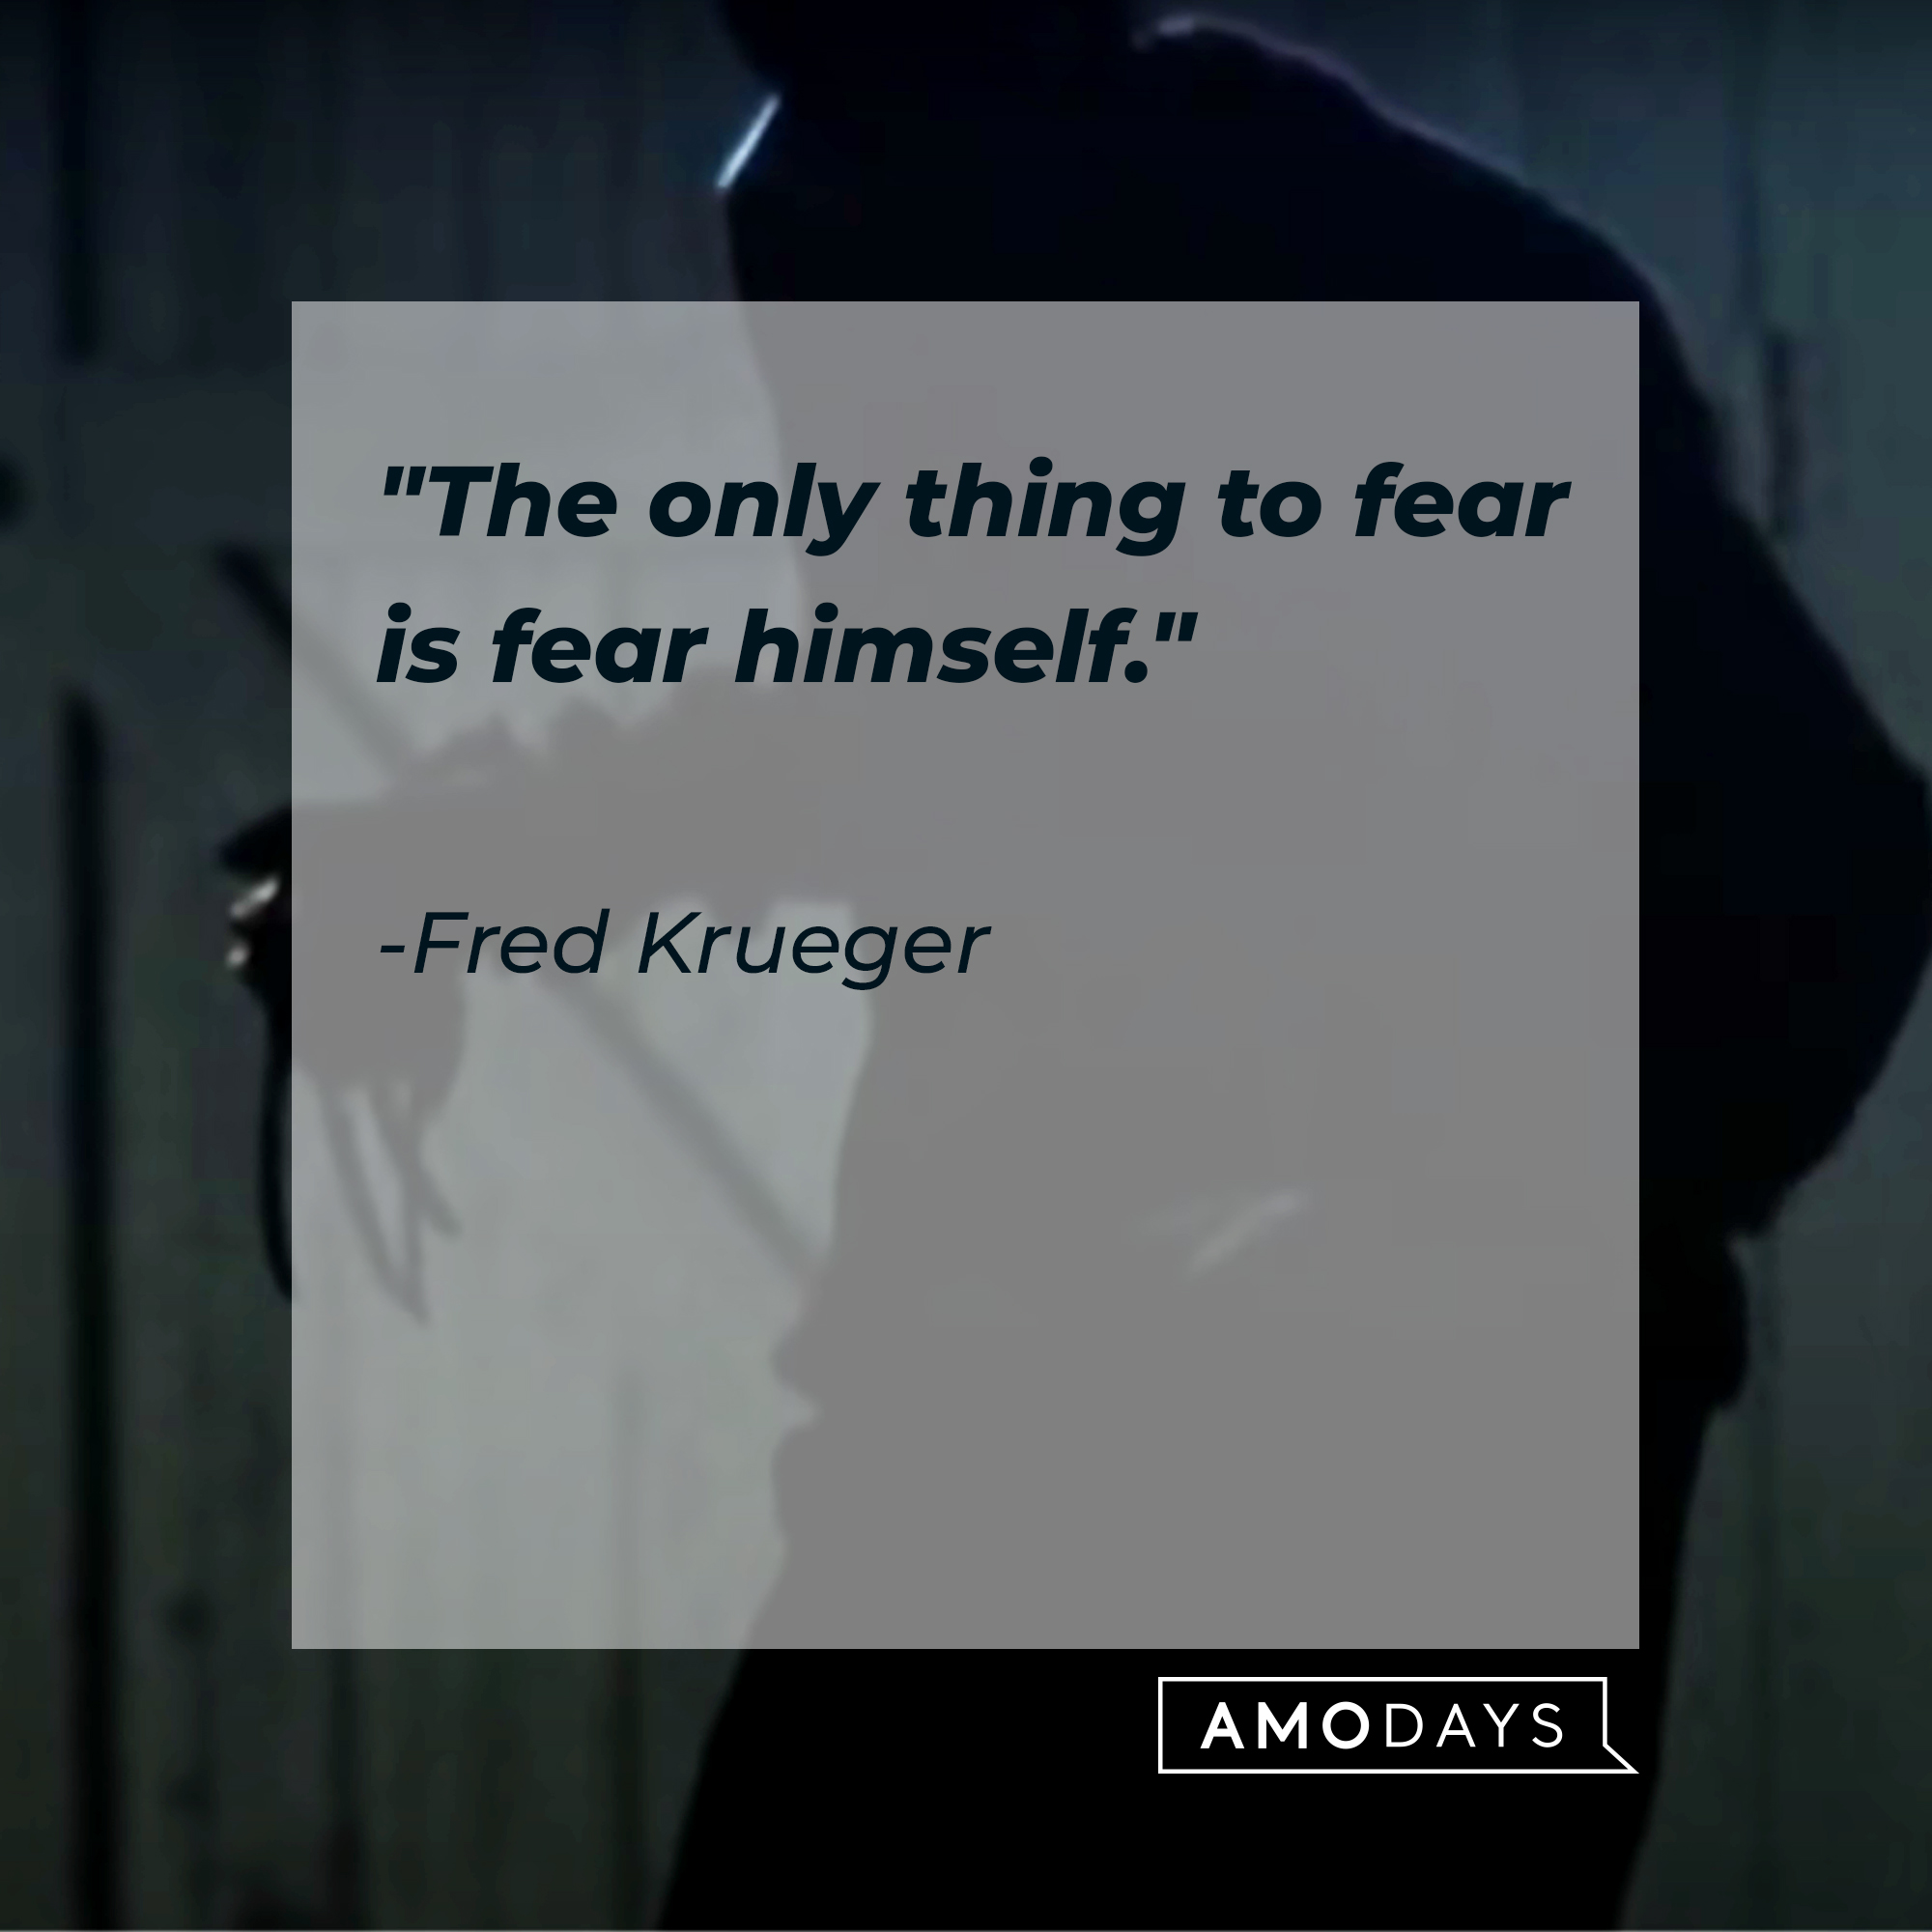 Freddy Krueger's quote: "The only thing to fear is fear himself." | Source: Facebook/ANightmareonElmStreet